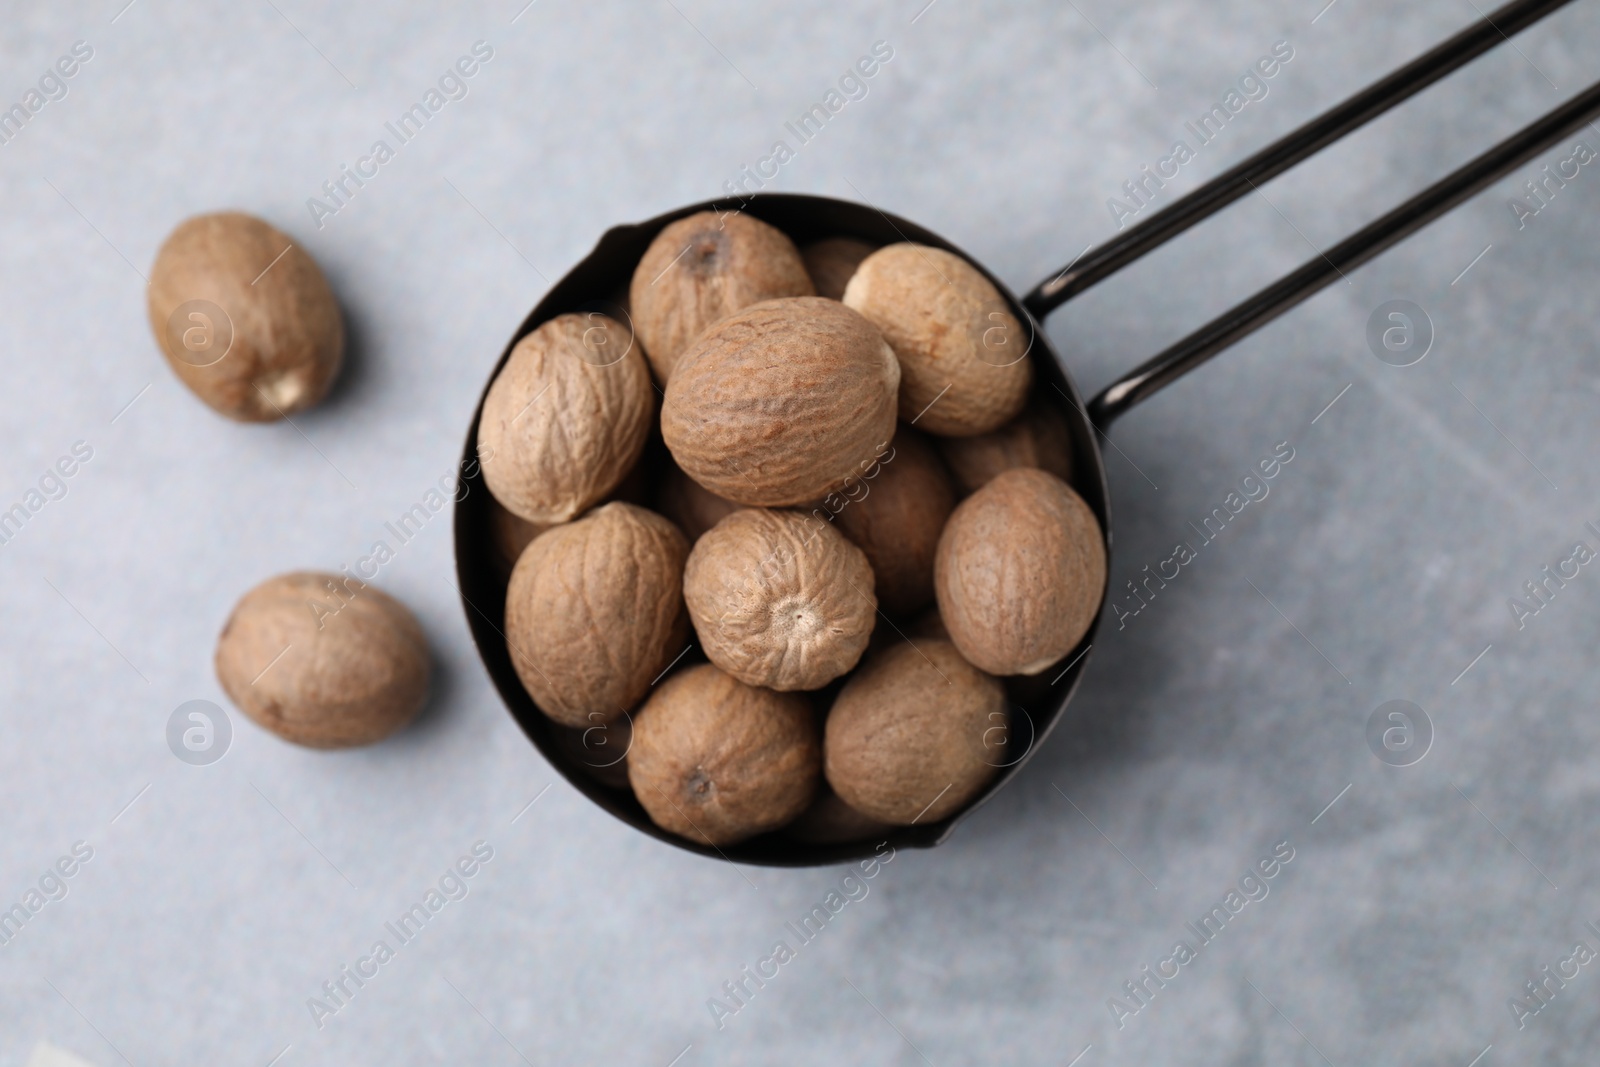 Photo of Whole nutmegs in small saucepan on light table, top view